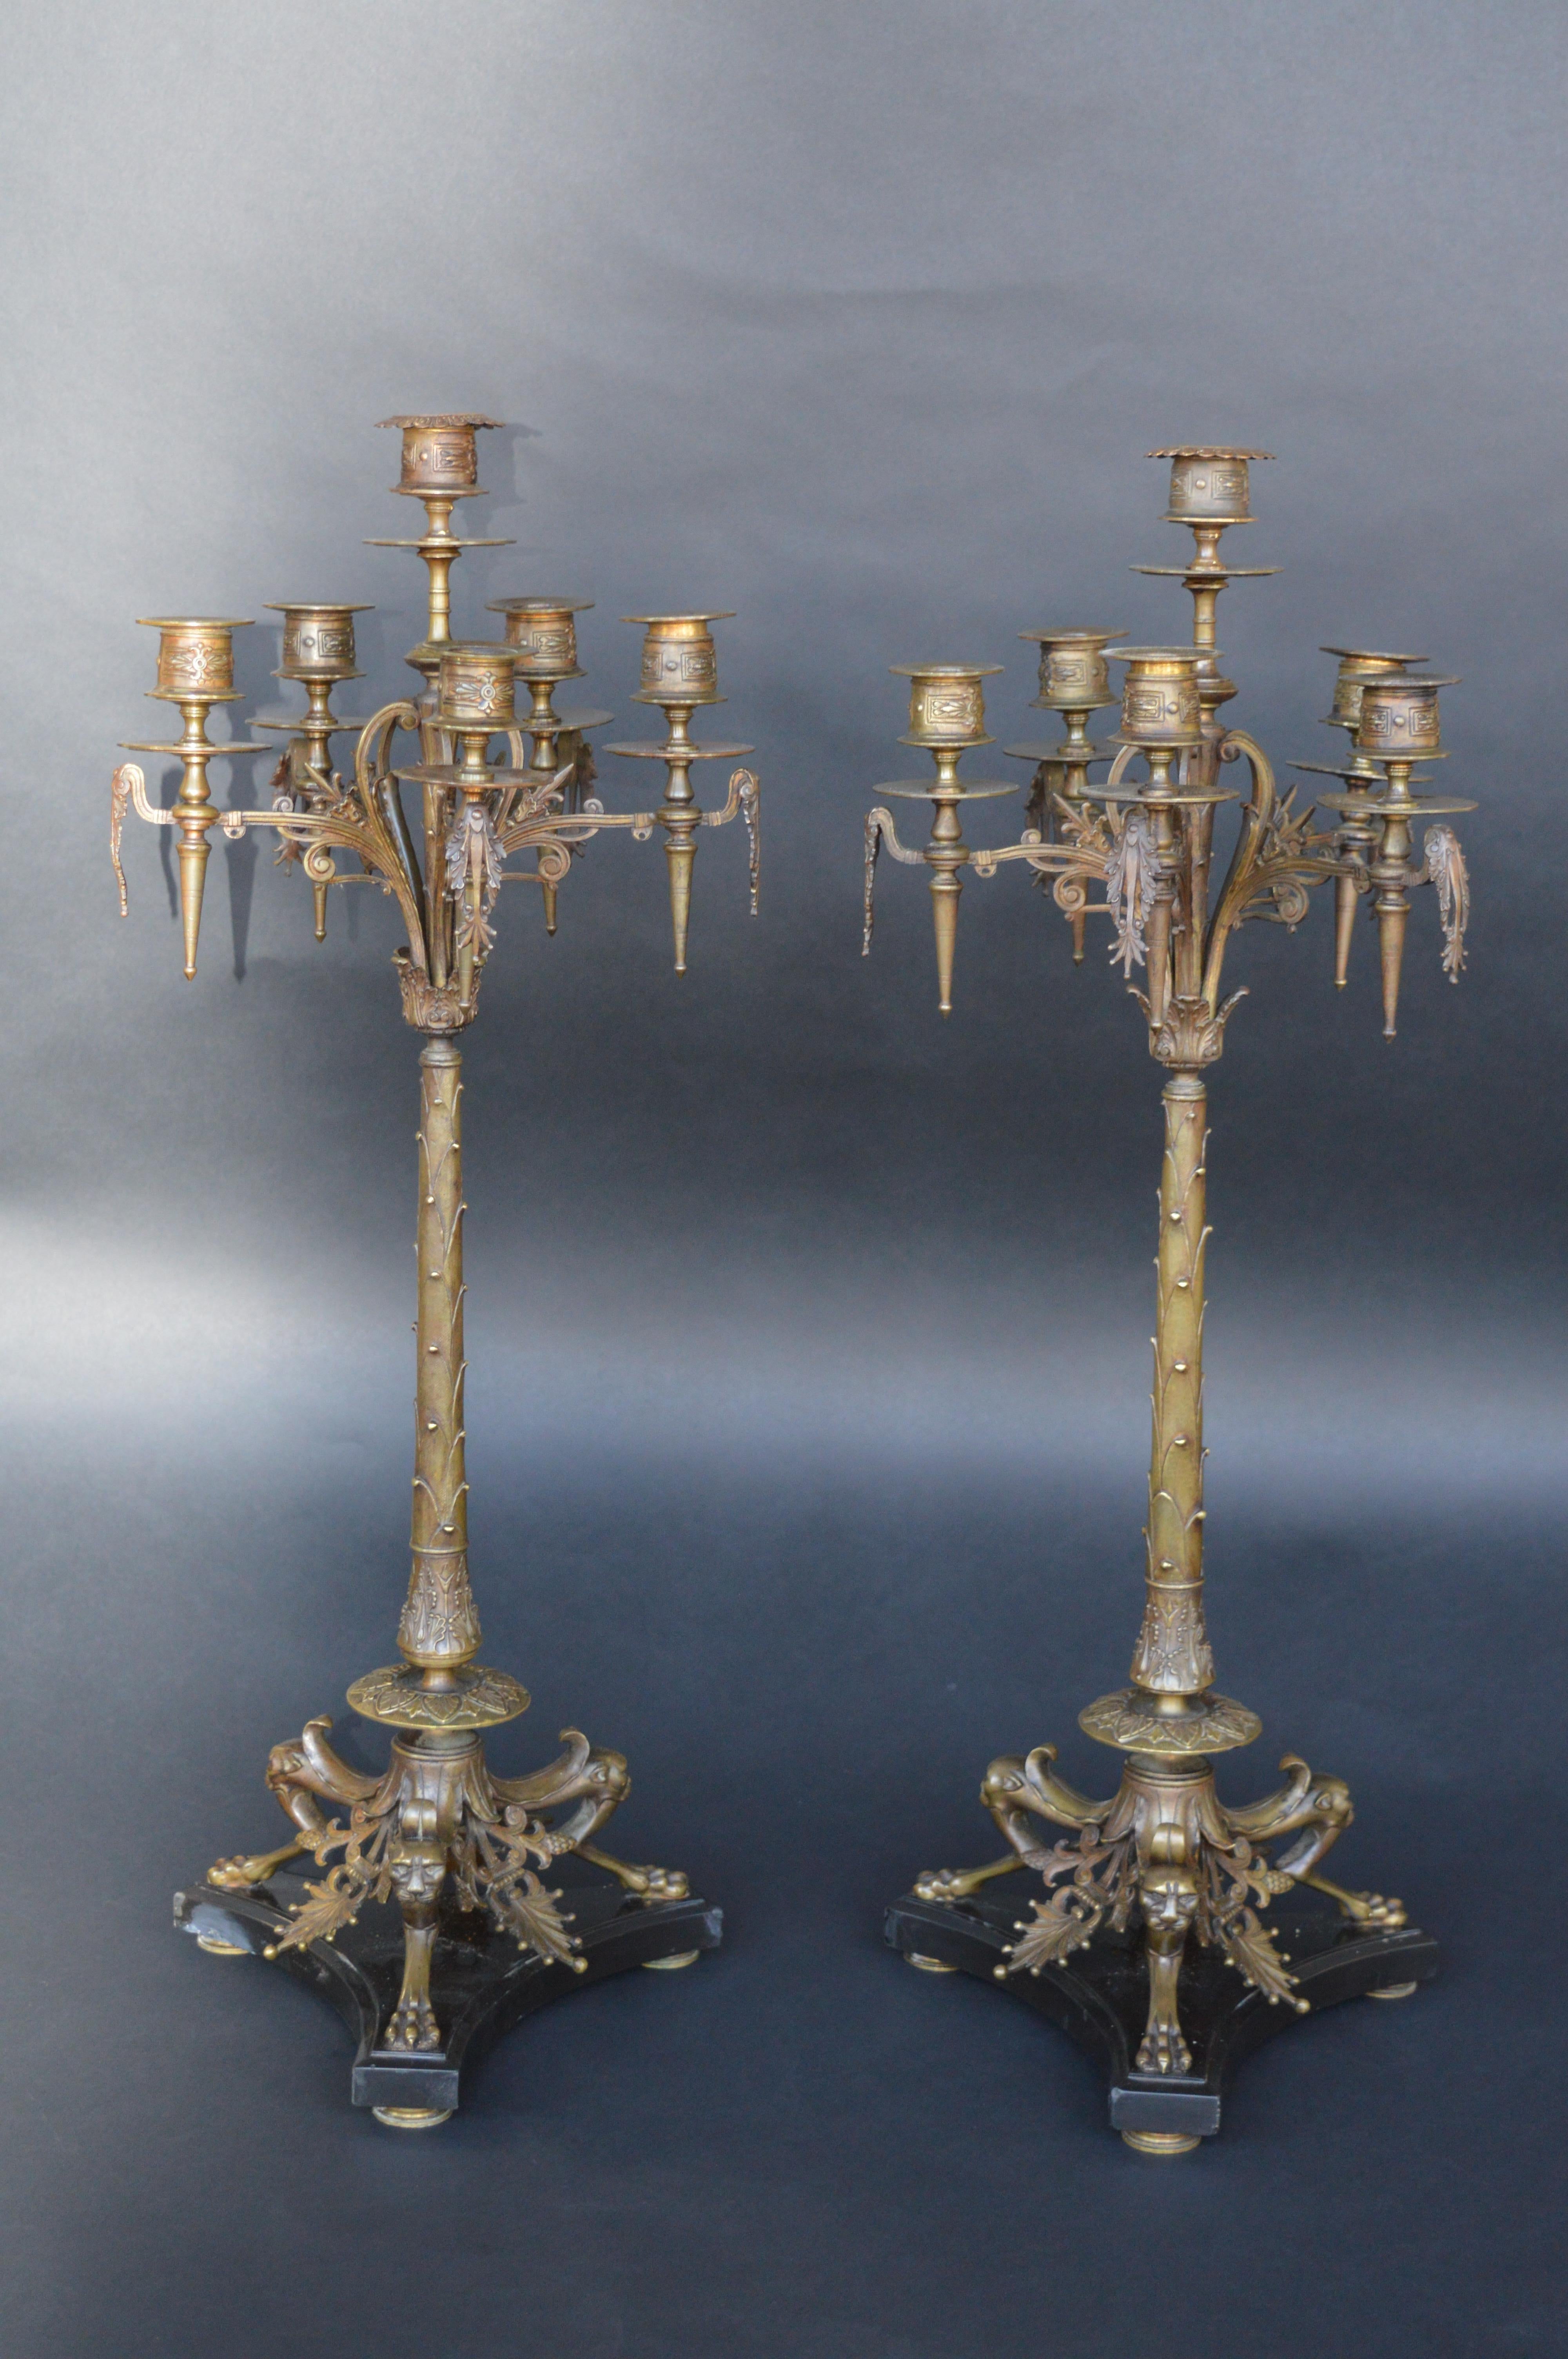 Pair of 19th Century French Bronze Candelabras with claw feet on black marble base.